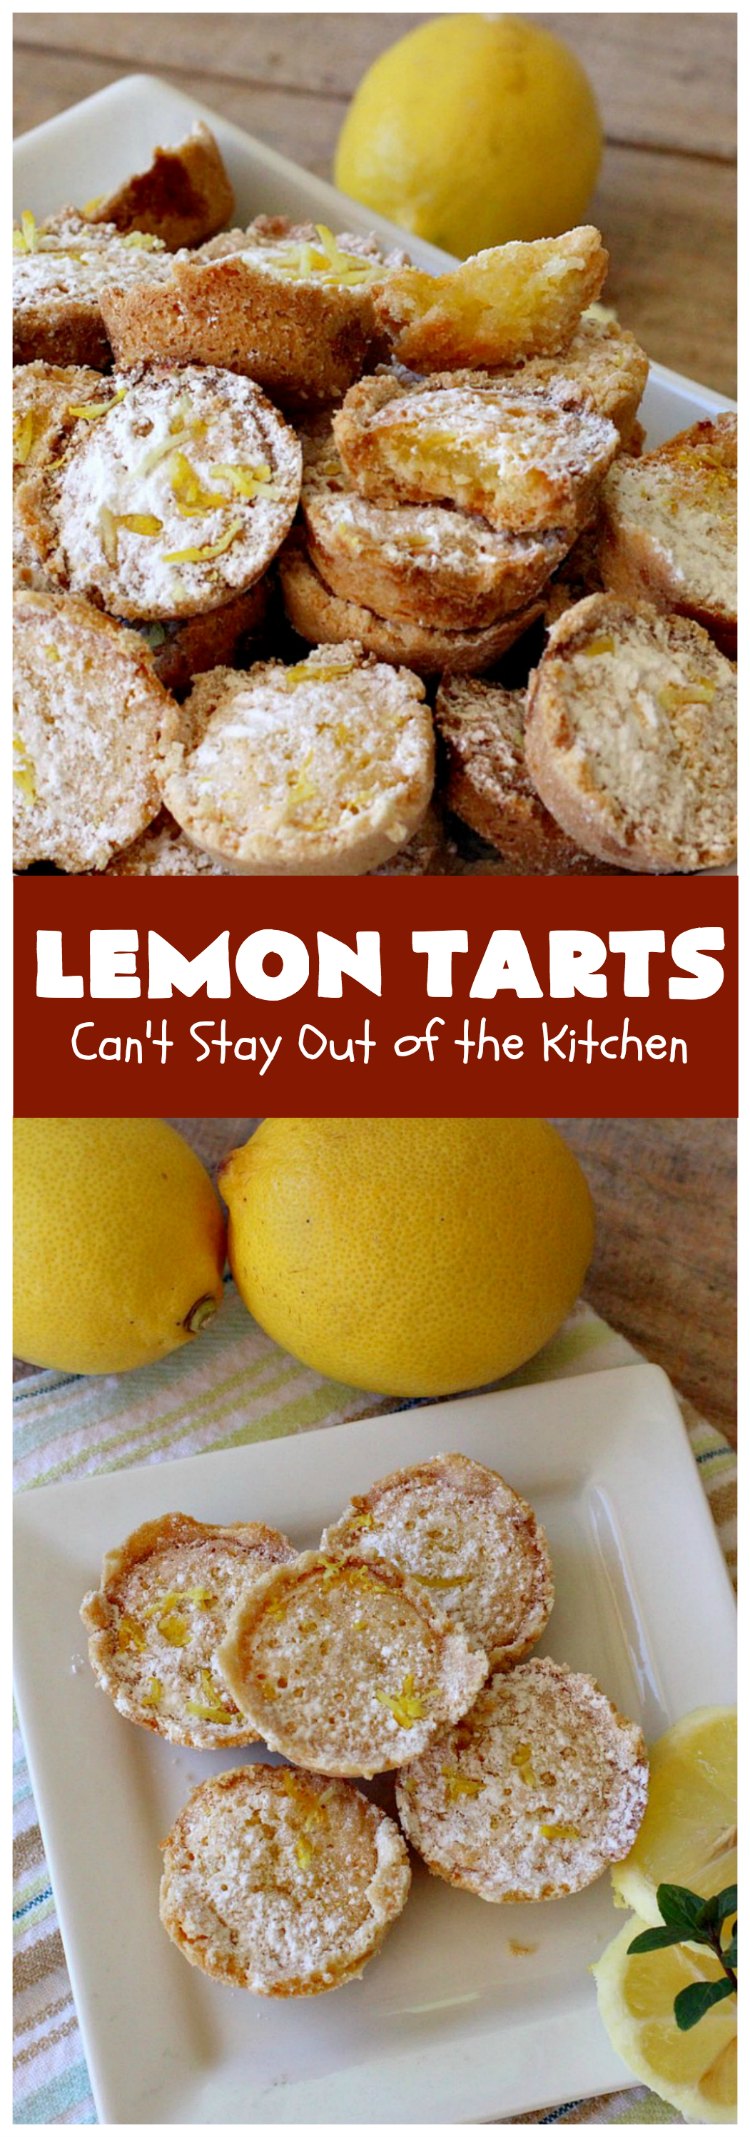 Lemon Tarts | Can't Stay Out of the Kitchen